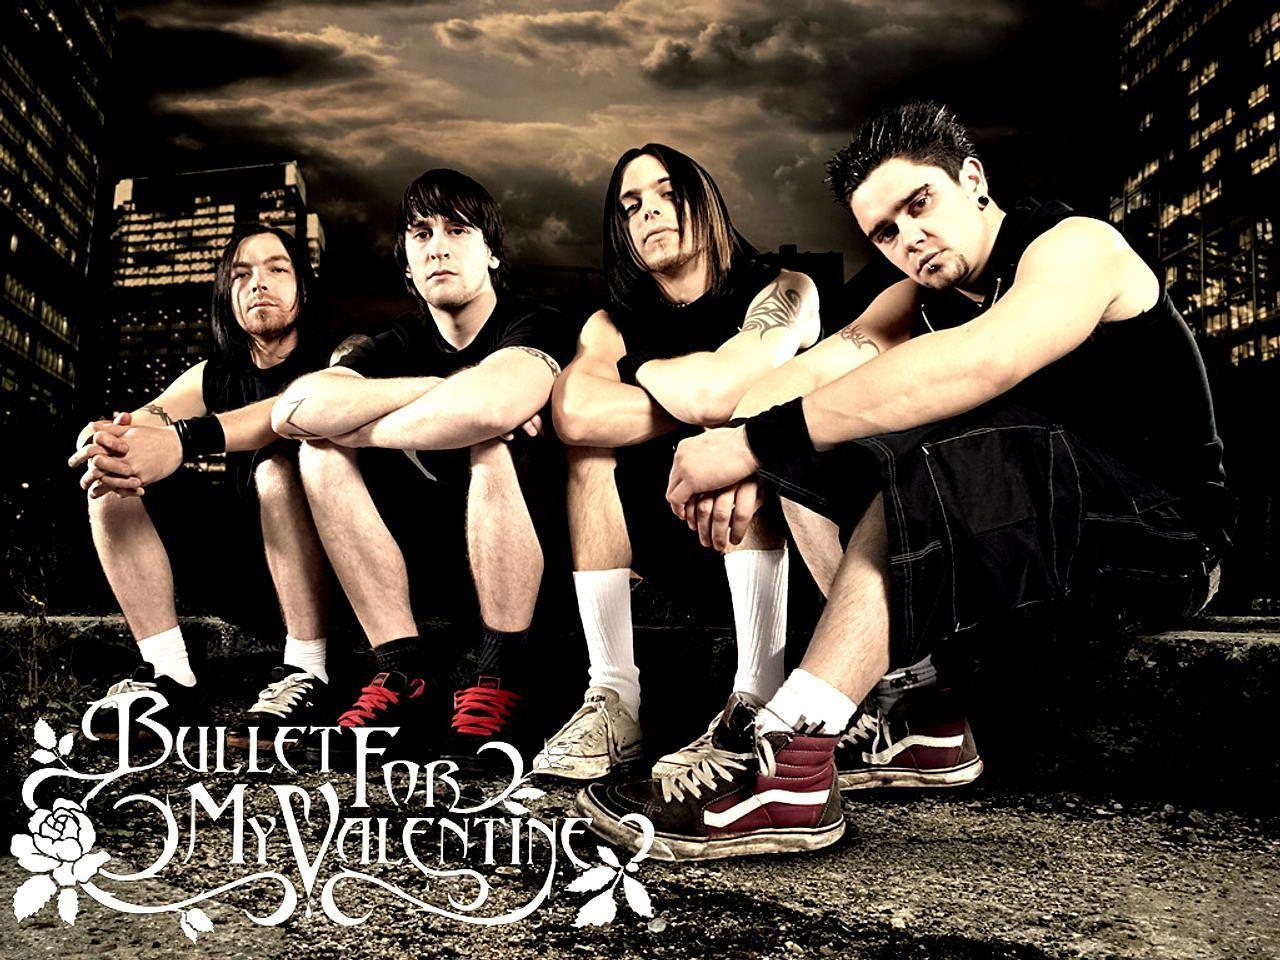 Bullet For My Valentine Wallpaper iPad Day. Image